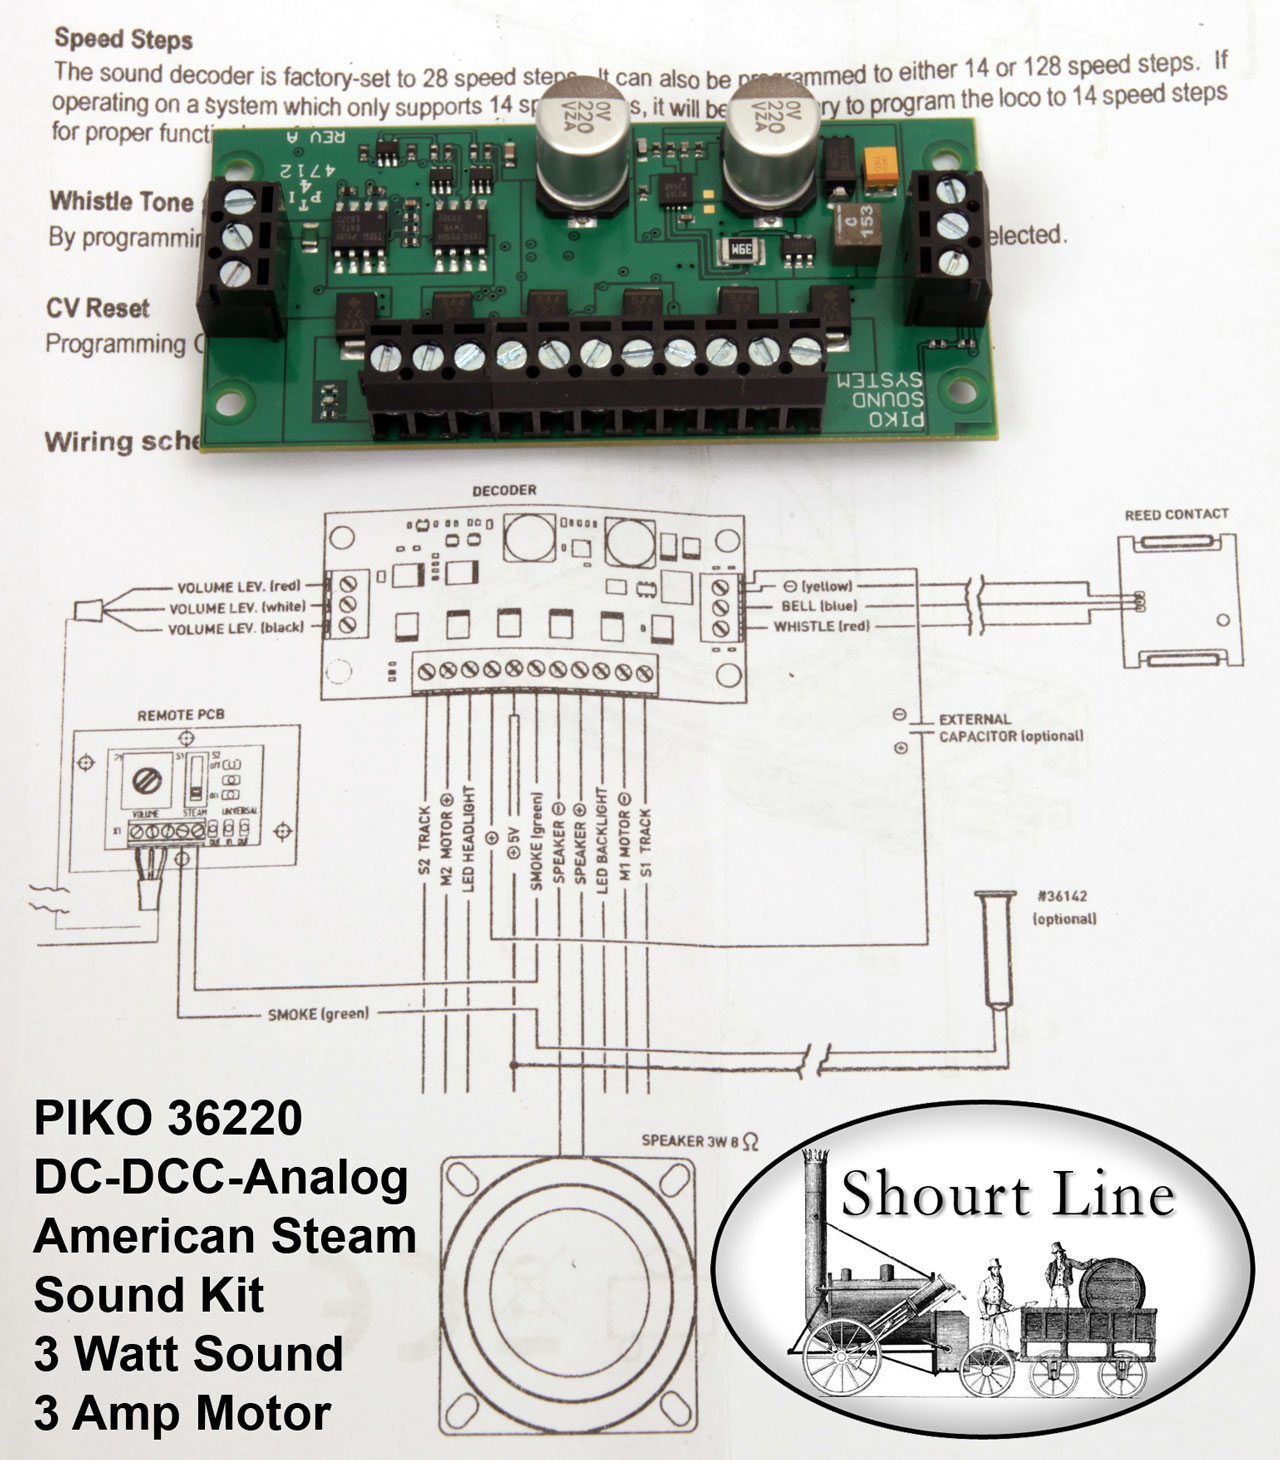 PIKO 36220 DC-DCC-Analog American Steam Sound Motor Decoder Kit instructions with decoder top